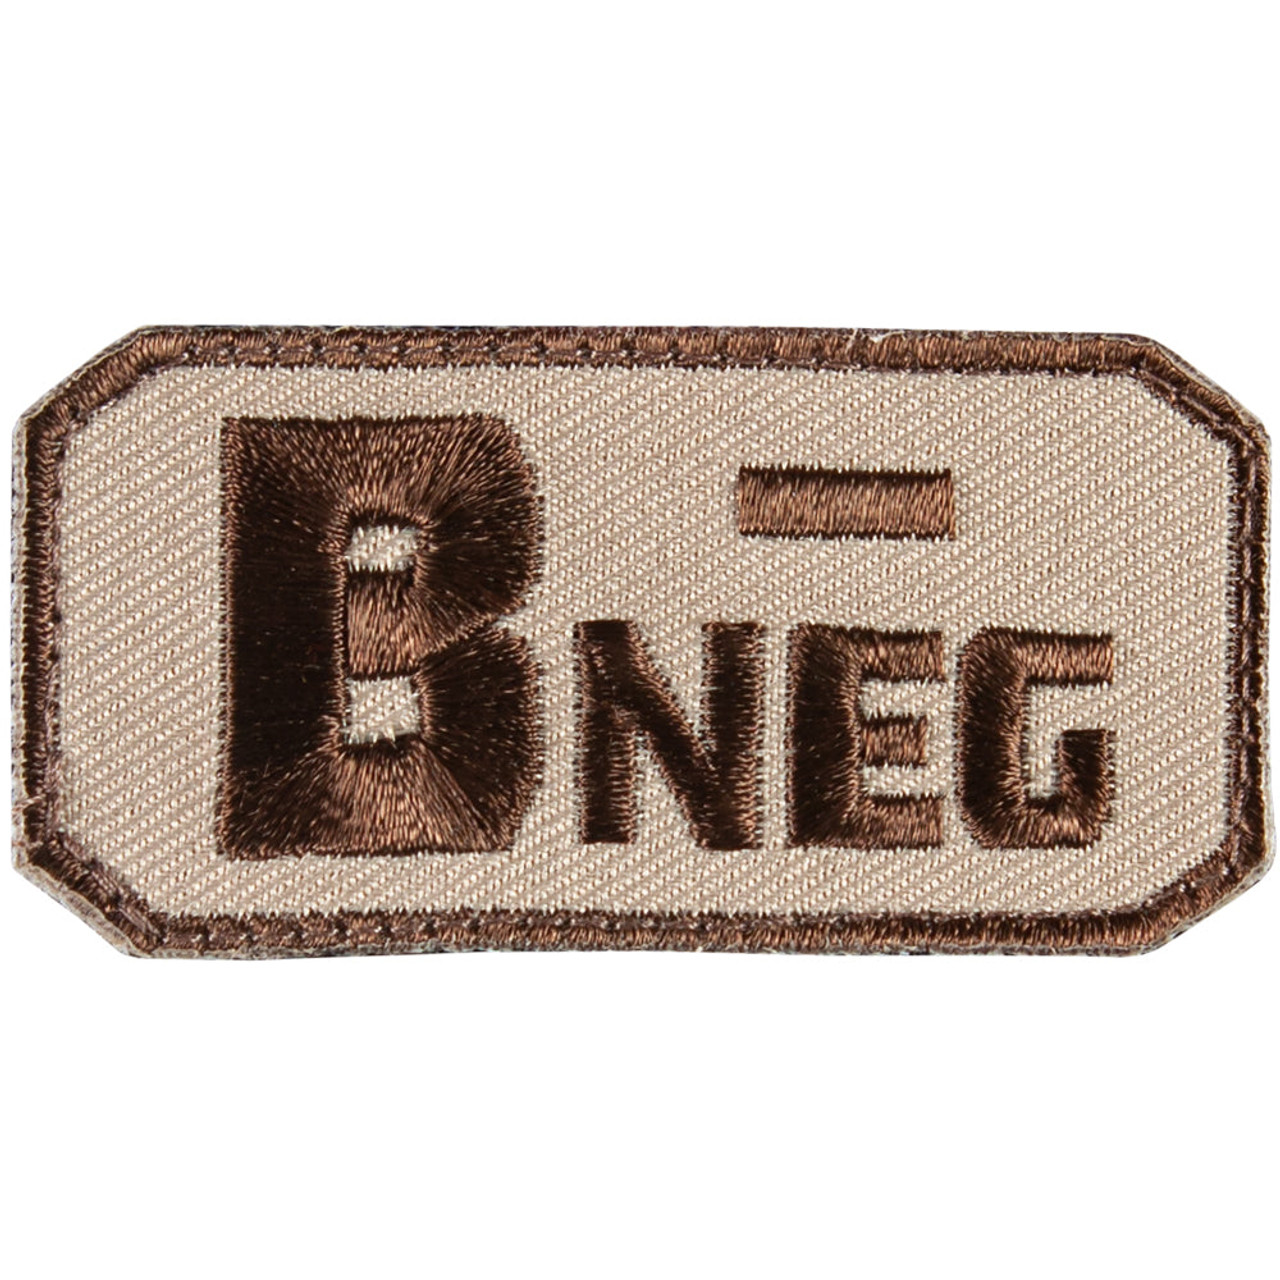 Blood Type Patch B Neg, Back Blood Patch, Patche Blood Type